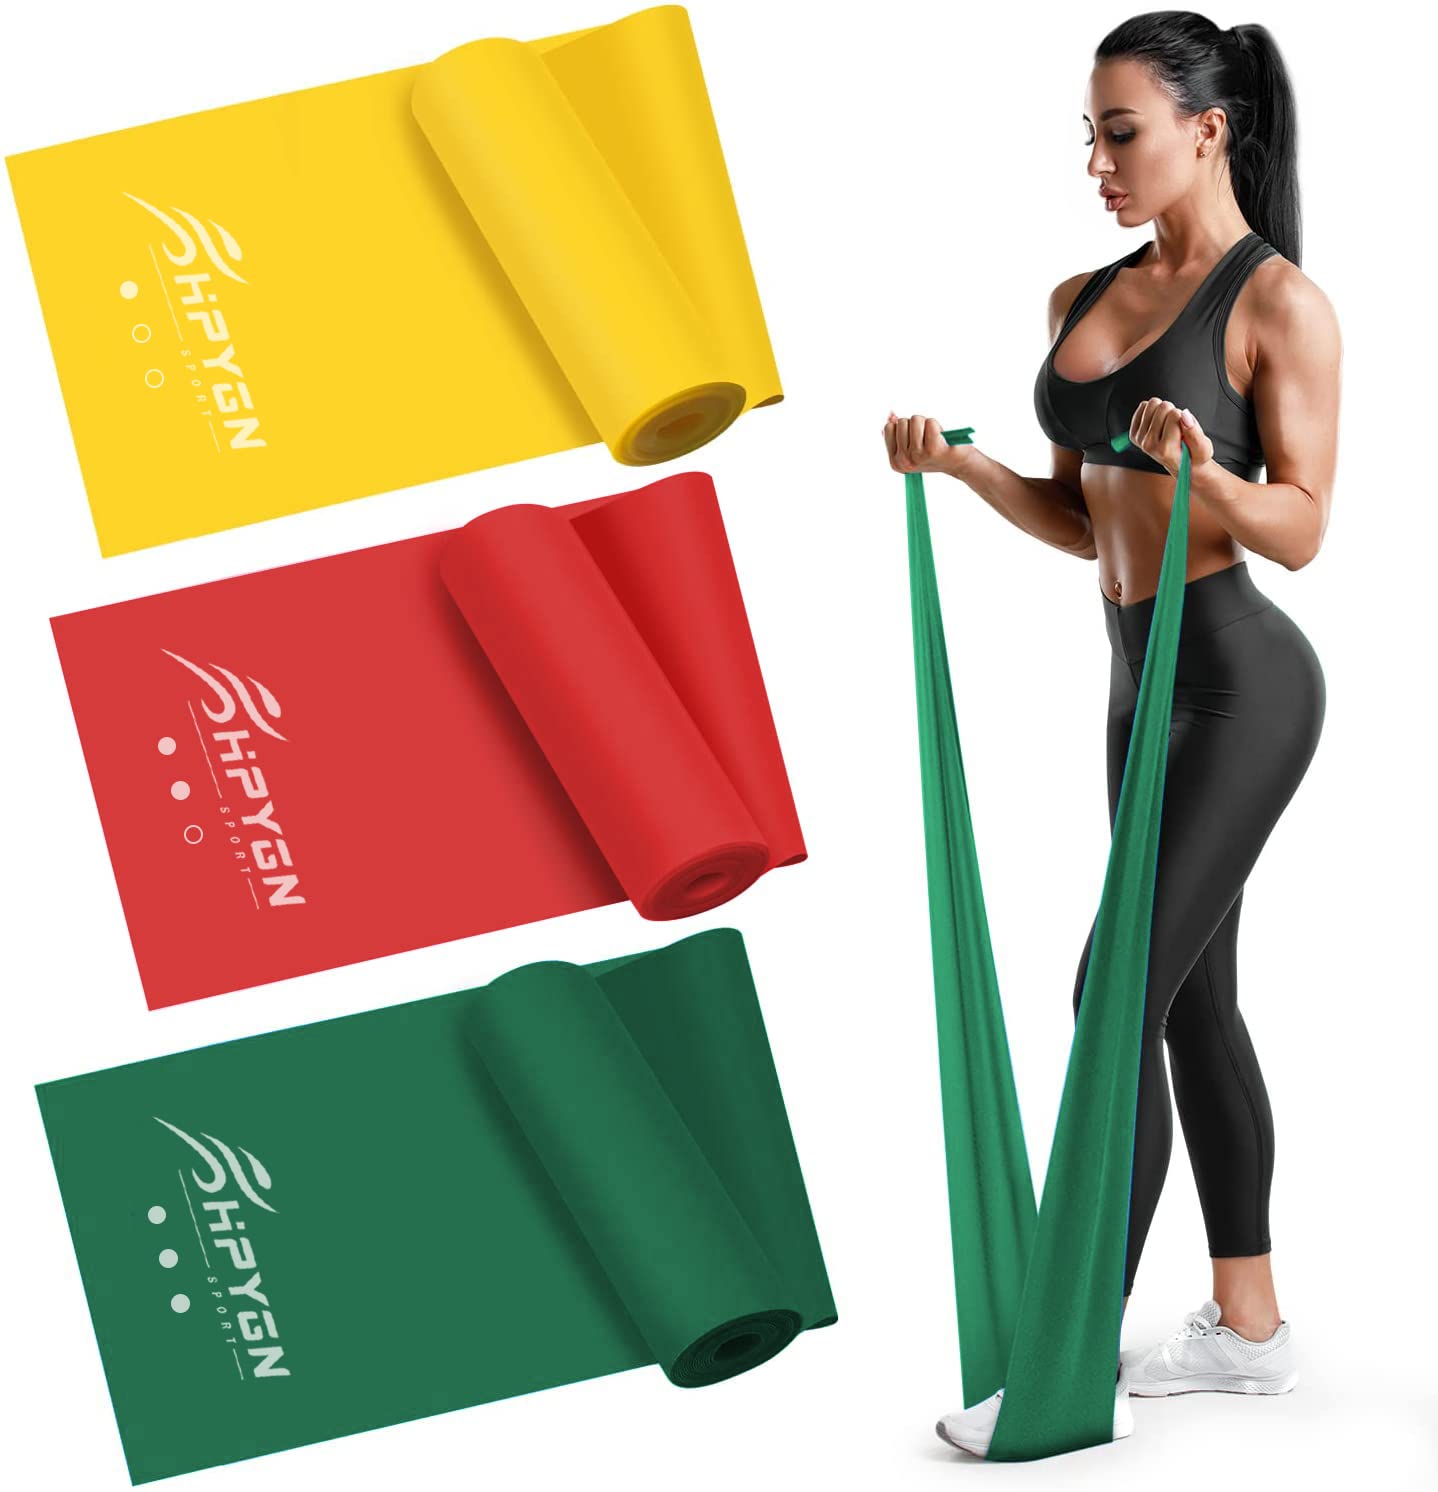 Resistance Bands, Exercise Bands, Physical Therapy Bands for Strength  Training, Yoga, Pilates, Stretching, Non-Latex Elastic Band with Different  Strengths, Workout Bands for Home Gym Red/Yellow/Green